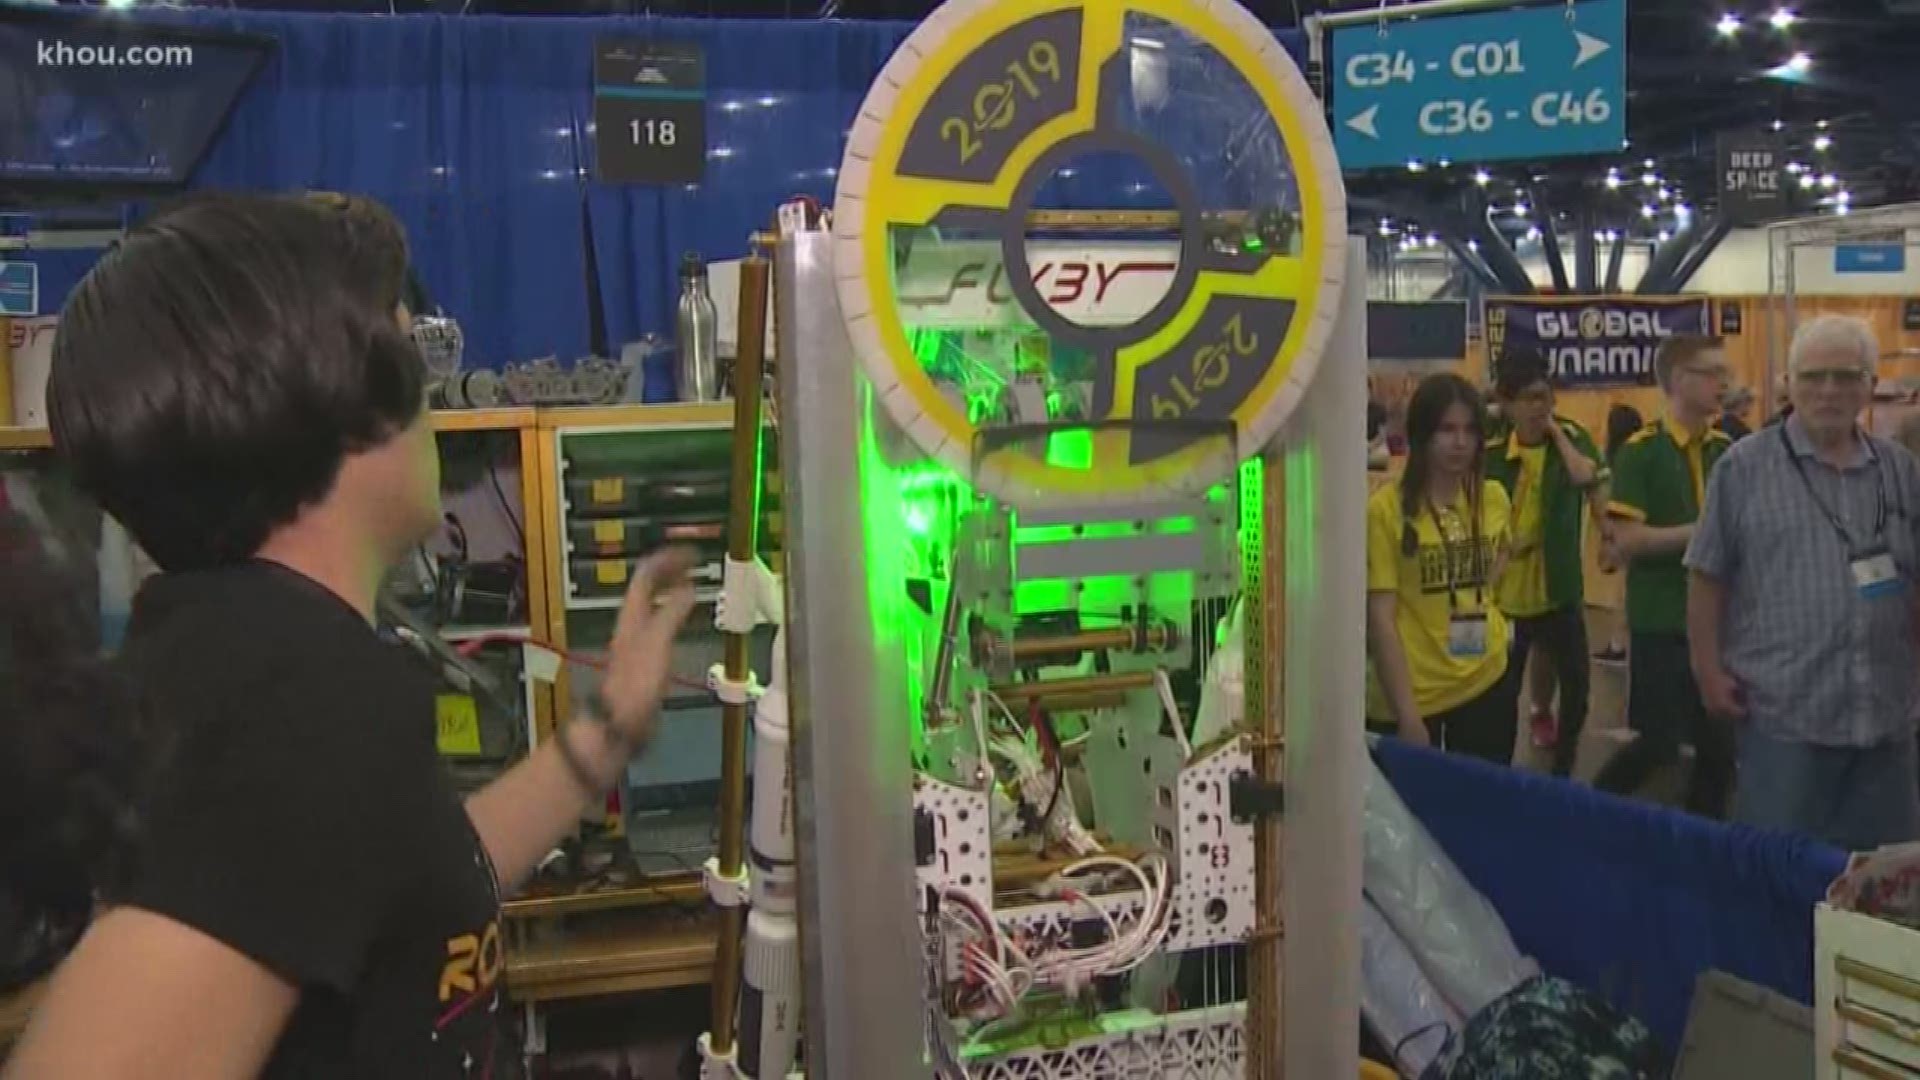 At the FIRST Robotics World Championship, engineers of the future are competing among one another.